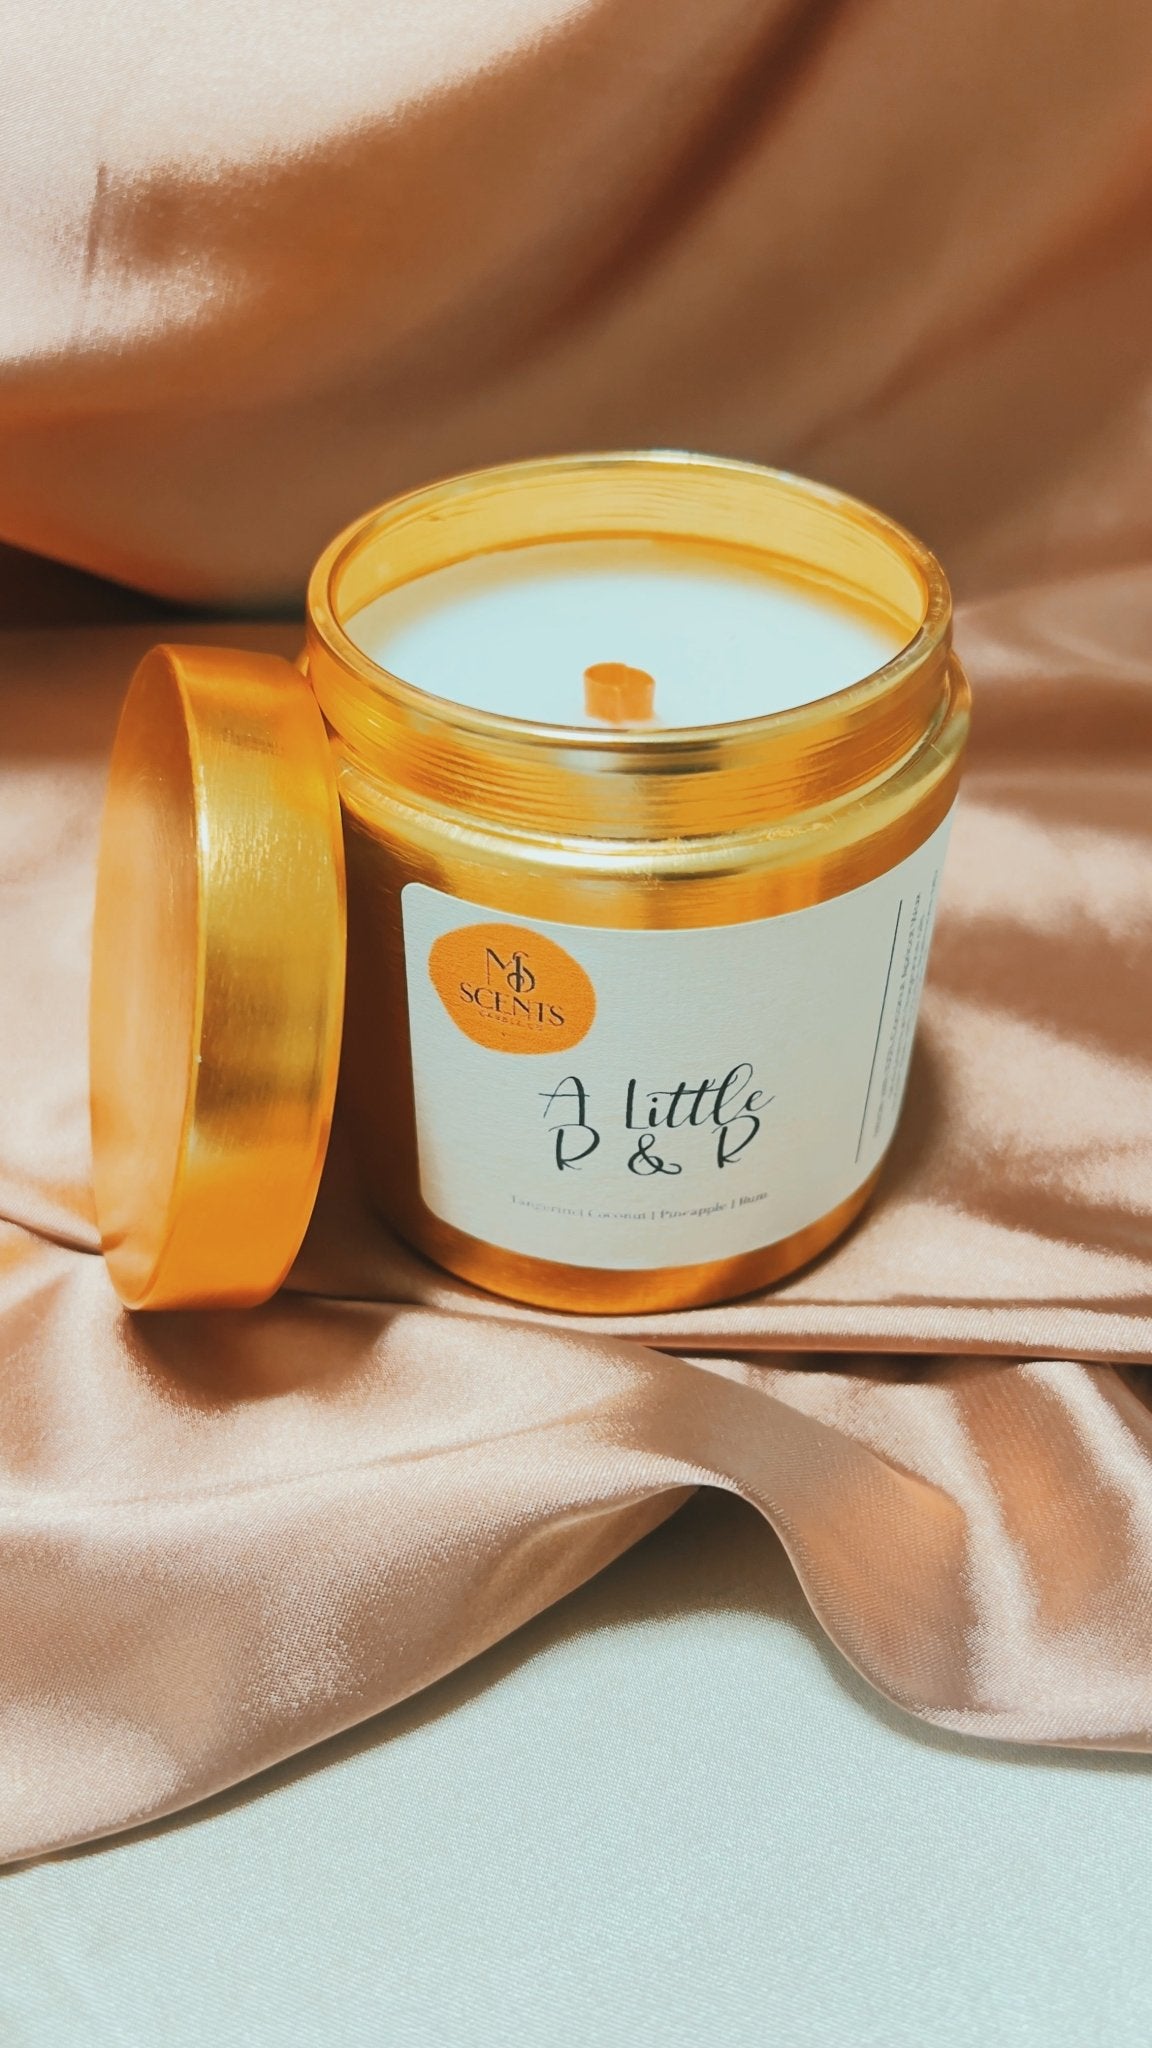 A Little R & R - MS Scents Candle Co.